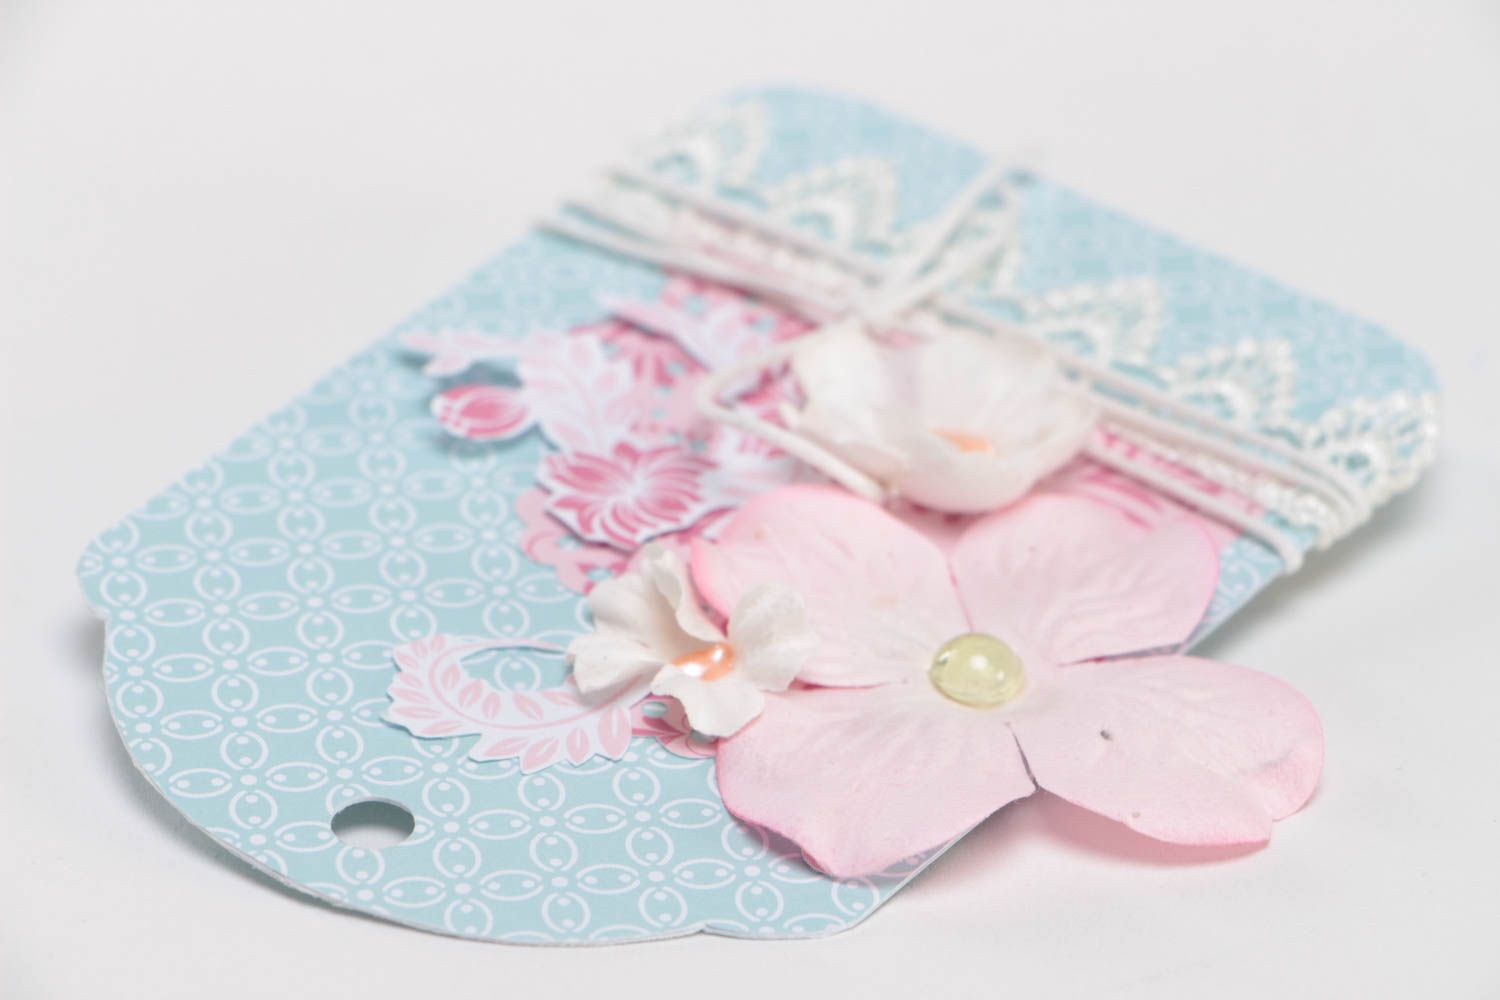 Handmade beautiful gift designer tag made using scrapbooking with orchid photo 4